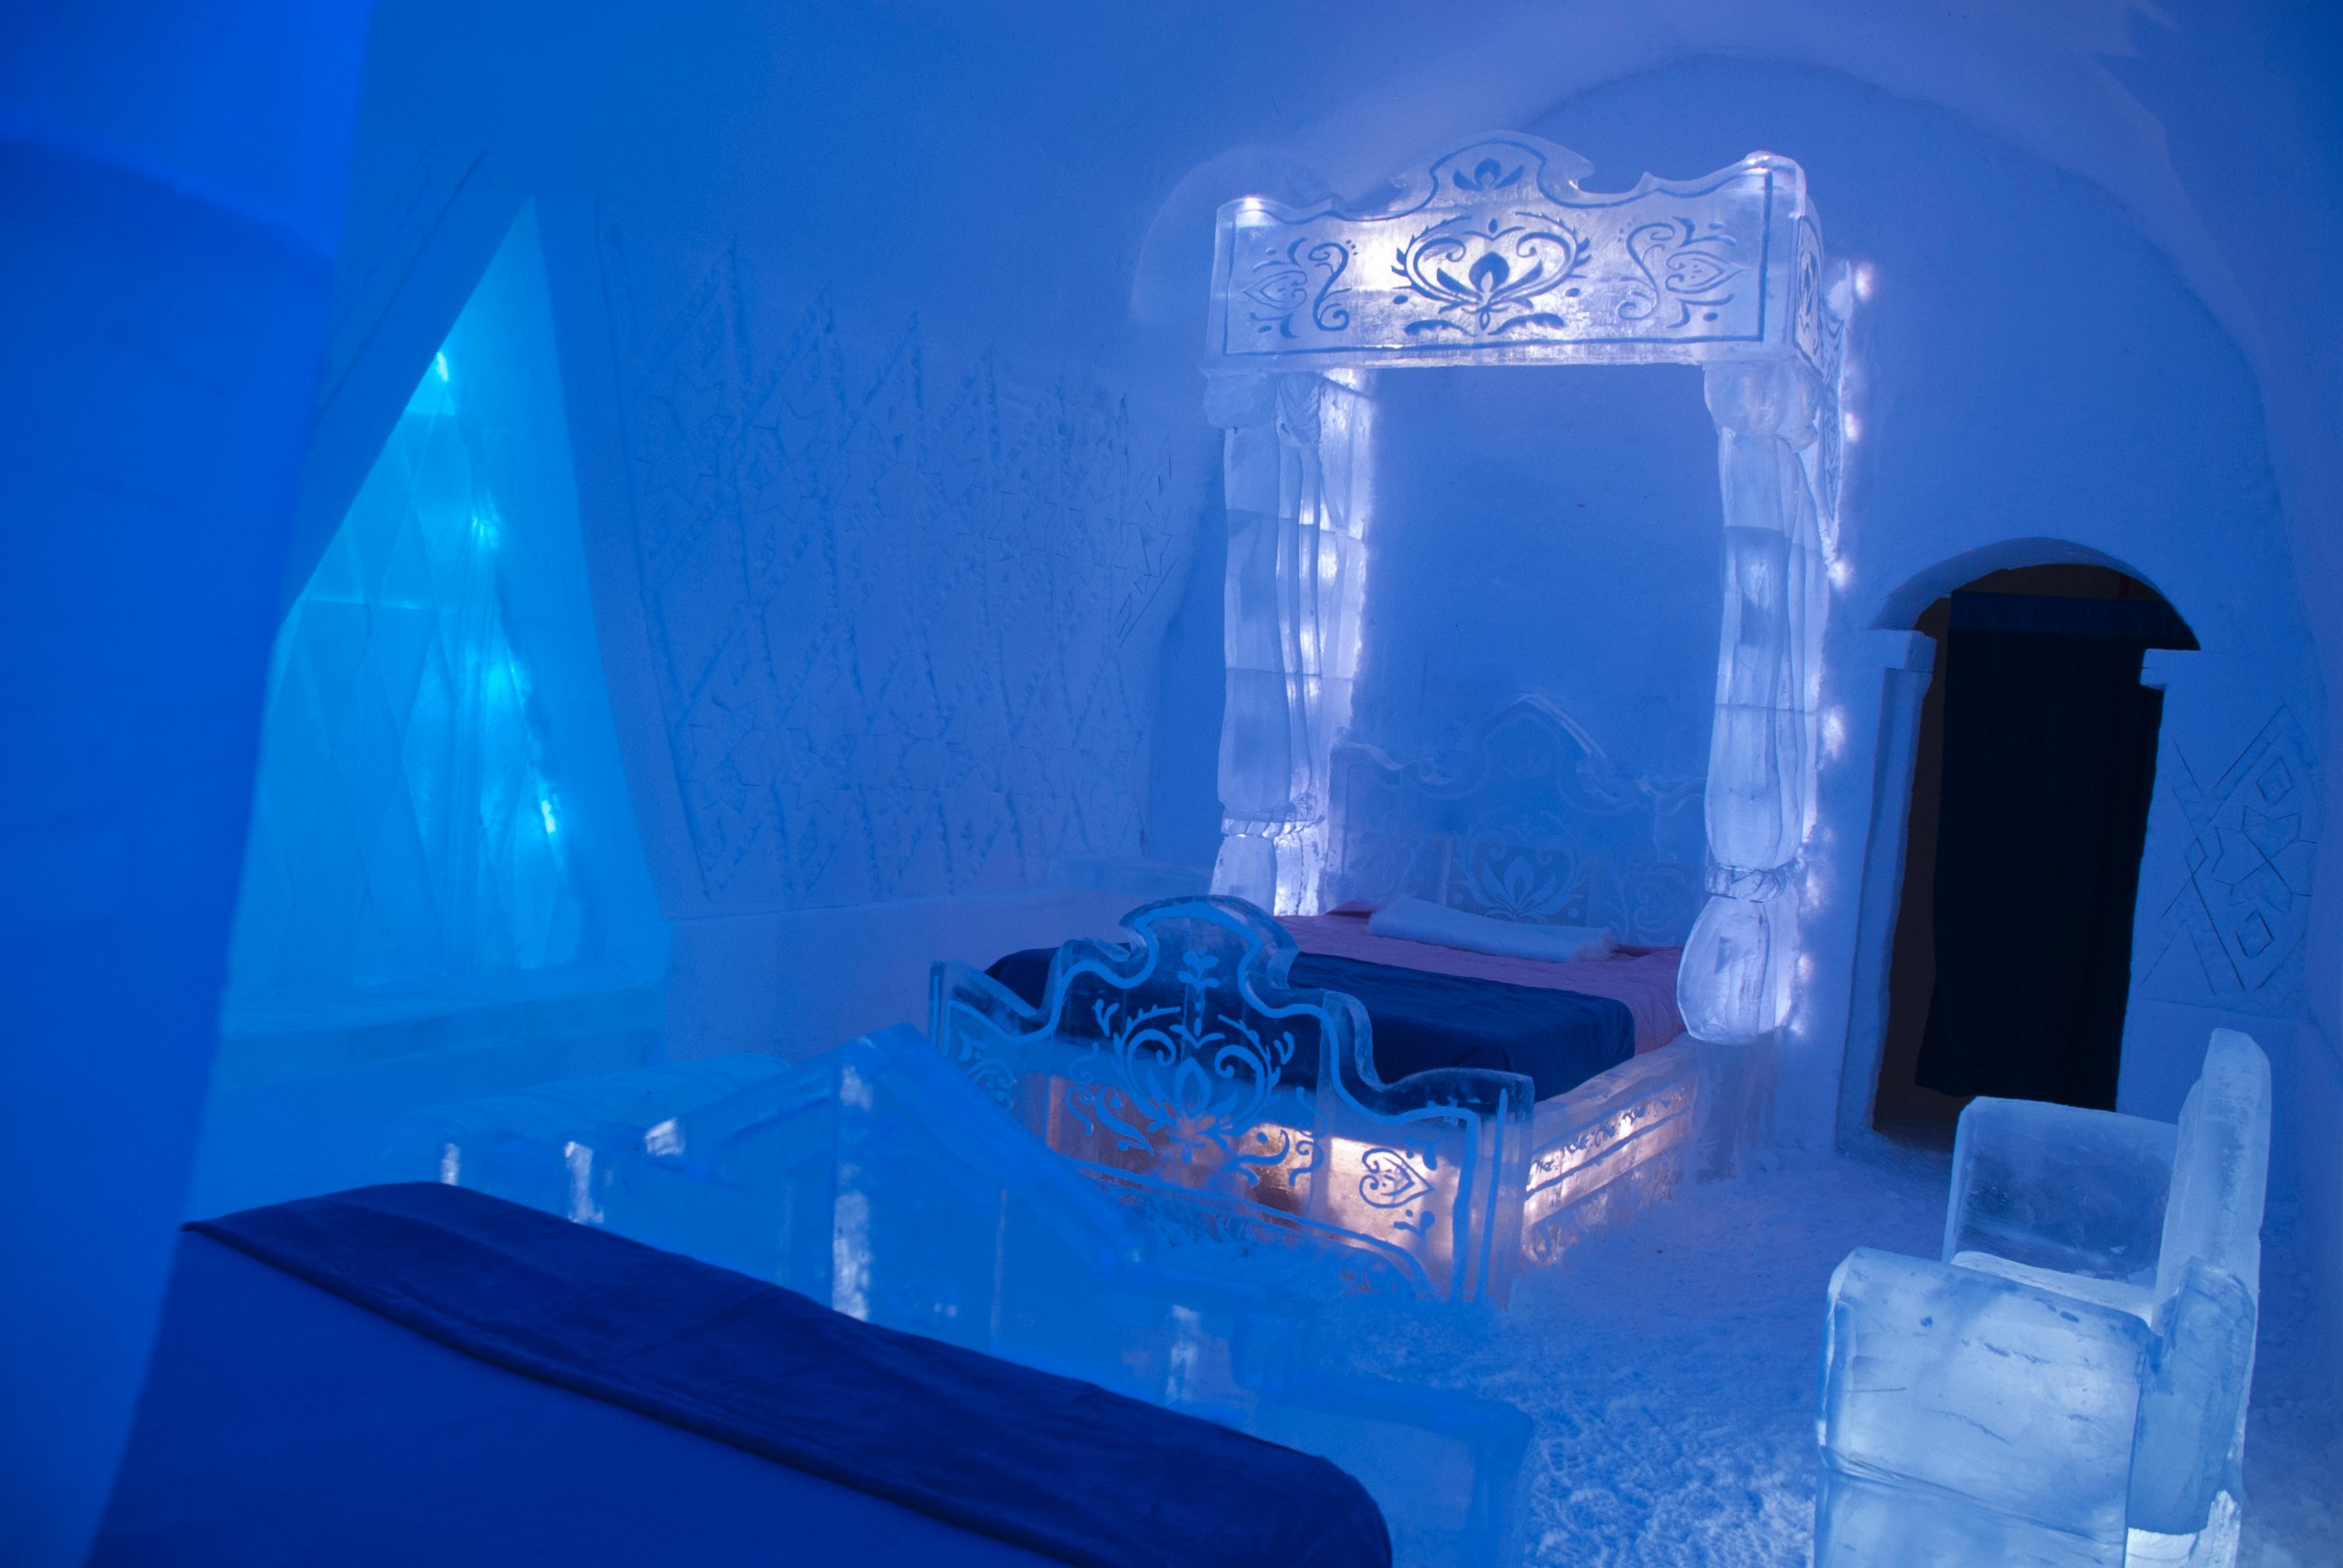 PHOTO: The Walt Disney Sudios and Quebec City's Hotel de Glace (Ice Hotel) unveil a special experiential "Frozen" themed guest suite and activity cave for the 2014 winter season.